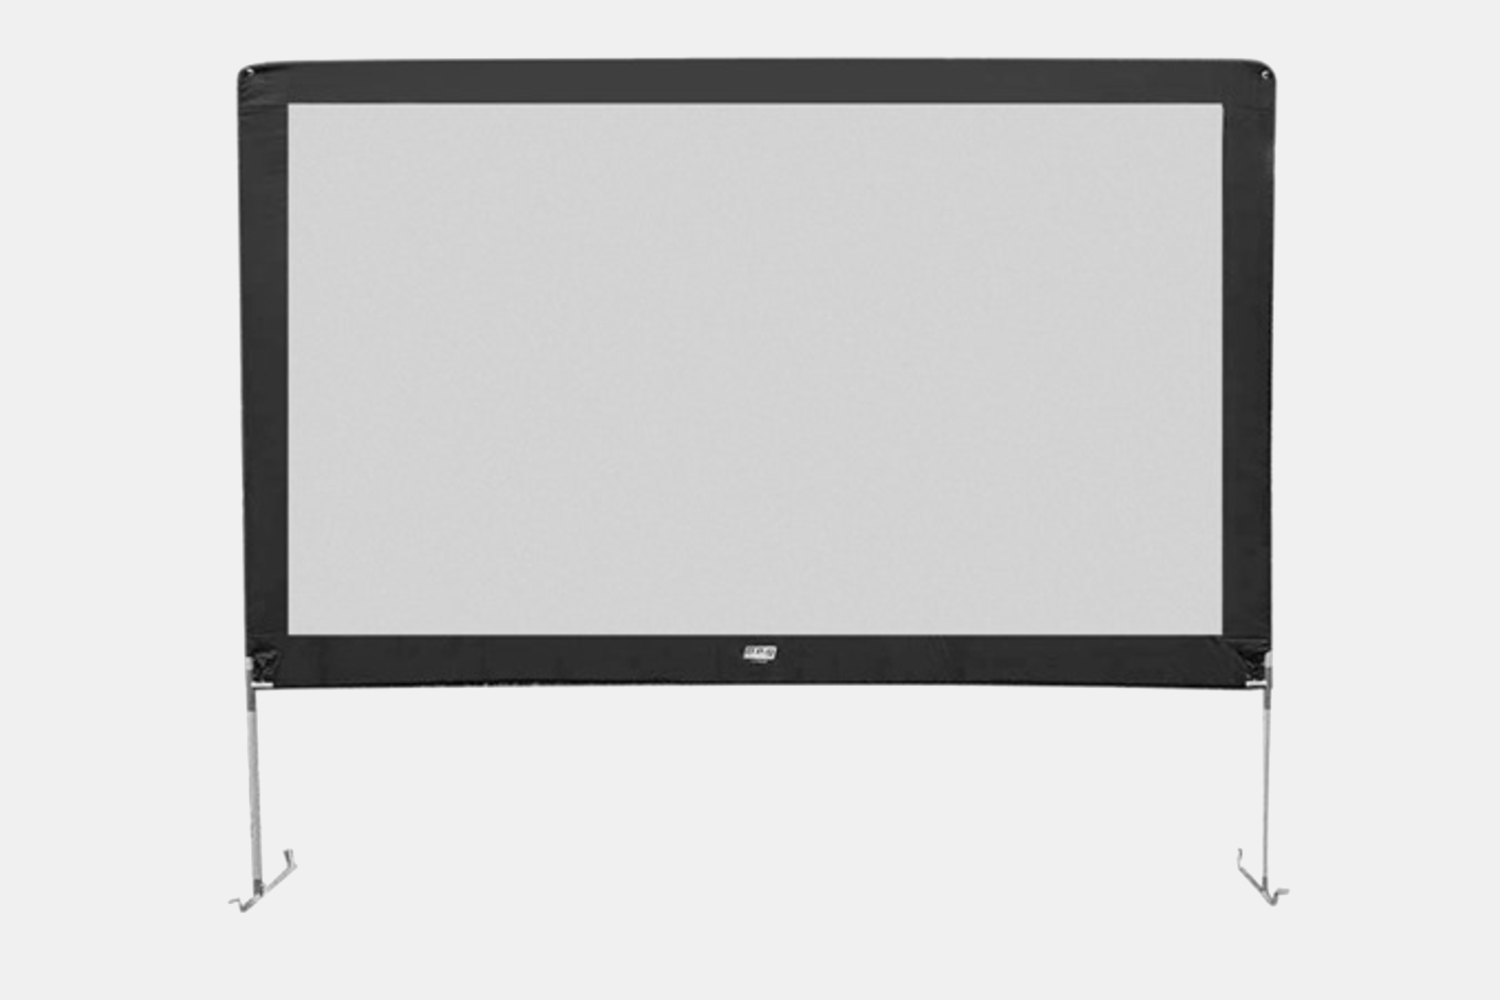 Outdoor movies screens are on sale for one day only at Woot.